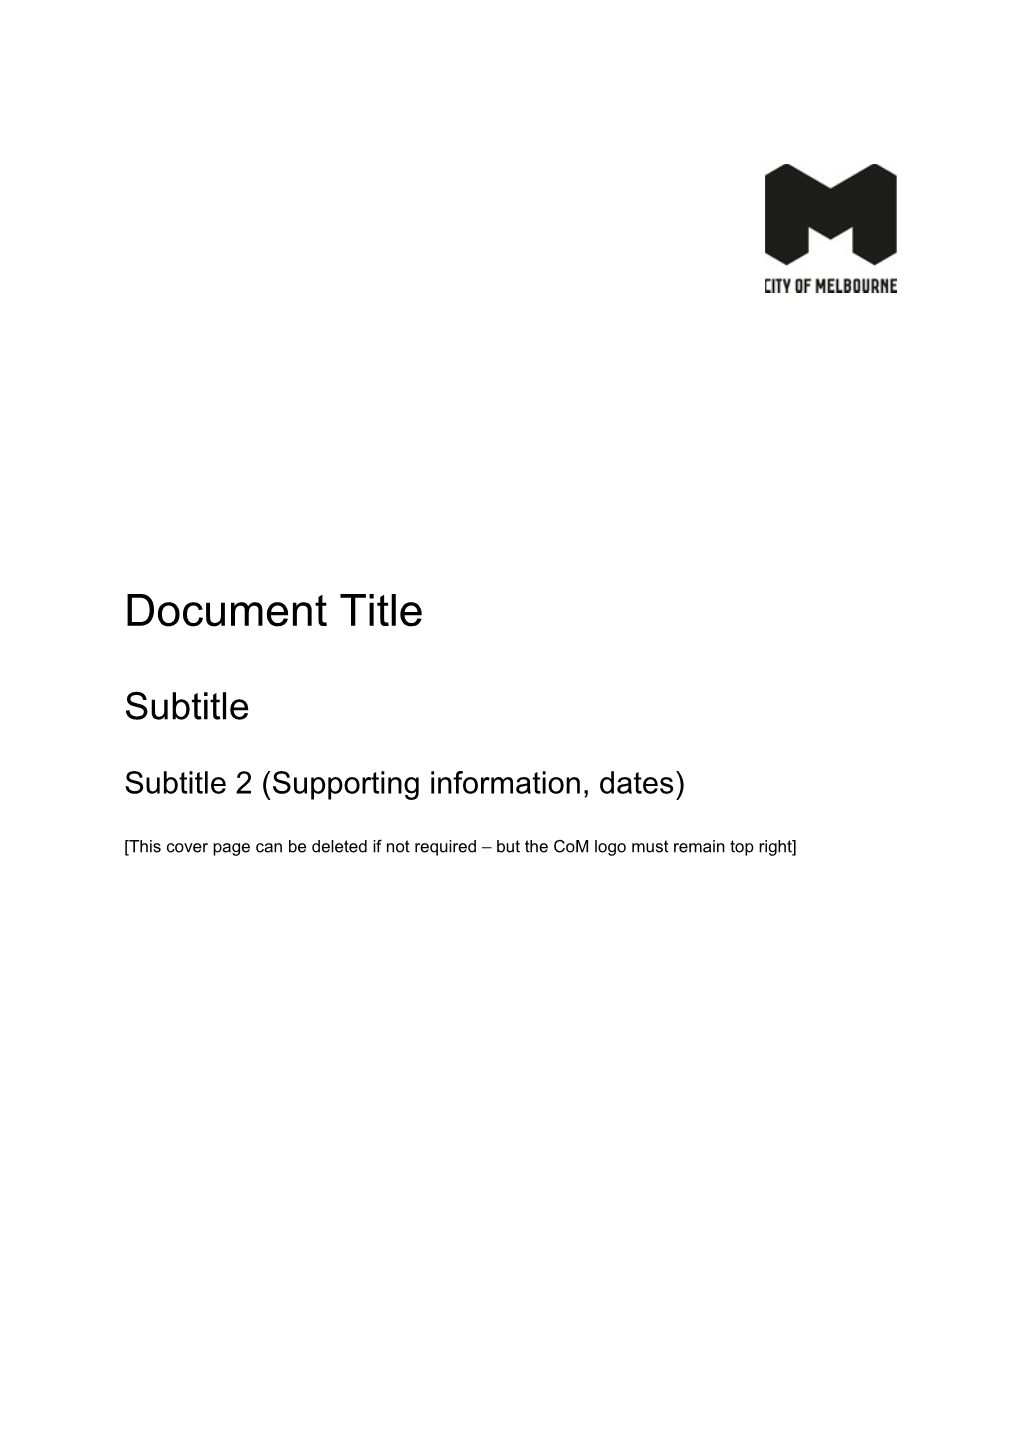 Subtitle 2 (Supporting Information, Dates)